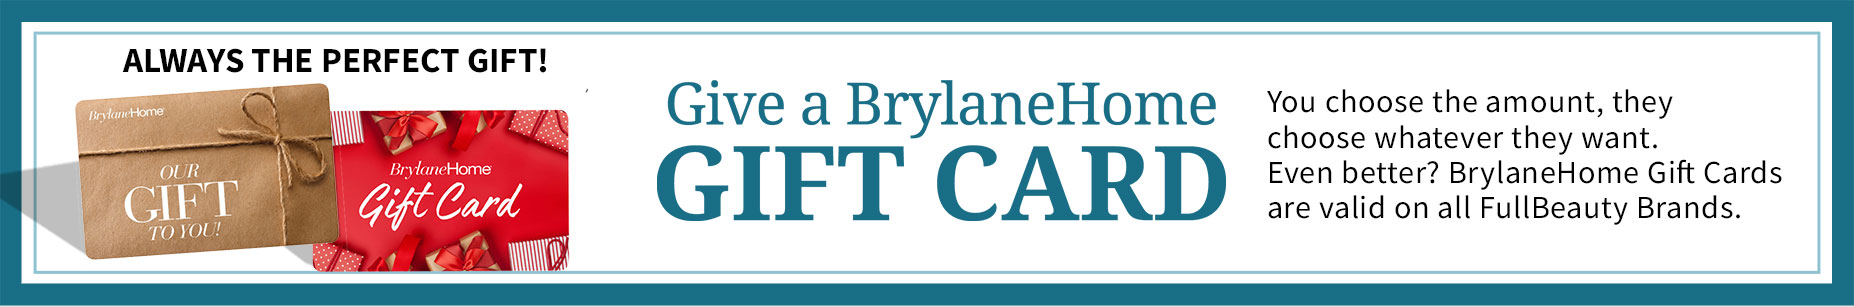 Always the Perfect Gift. Give a Brylane Home Gift Card. You choose the amount, they choose whatever they want. Even better? BrylaneHome Gift Cards are valid on all FullBeuty Brands.